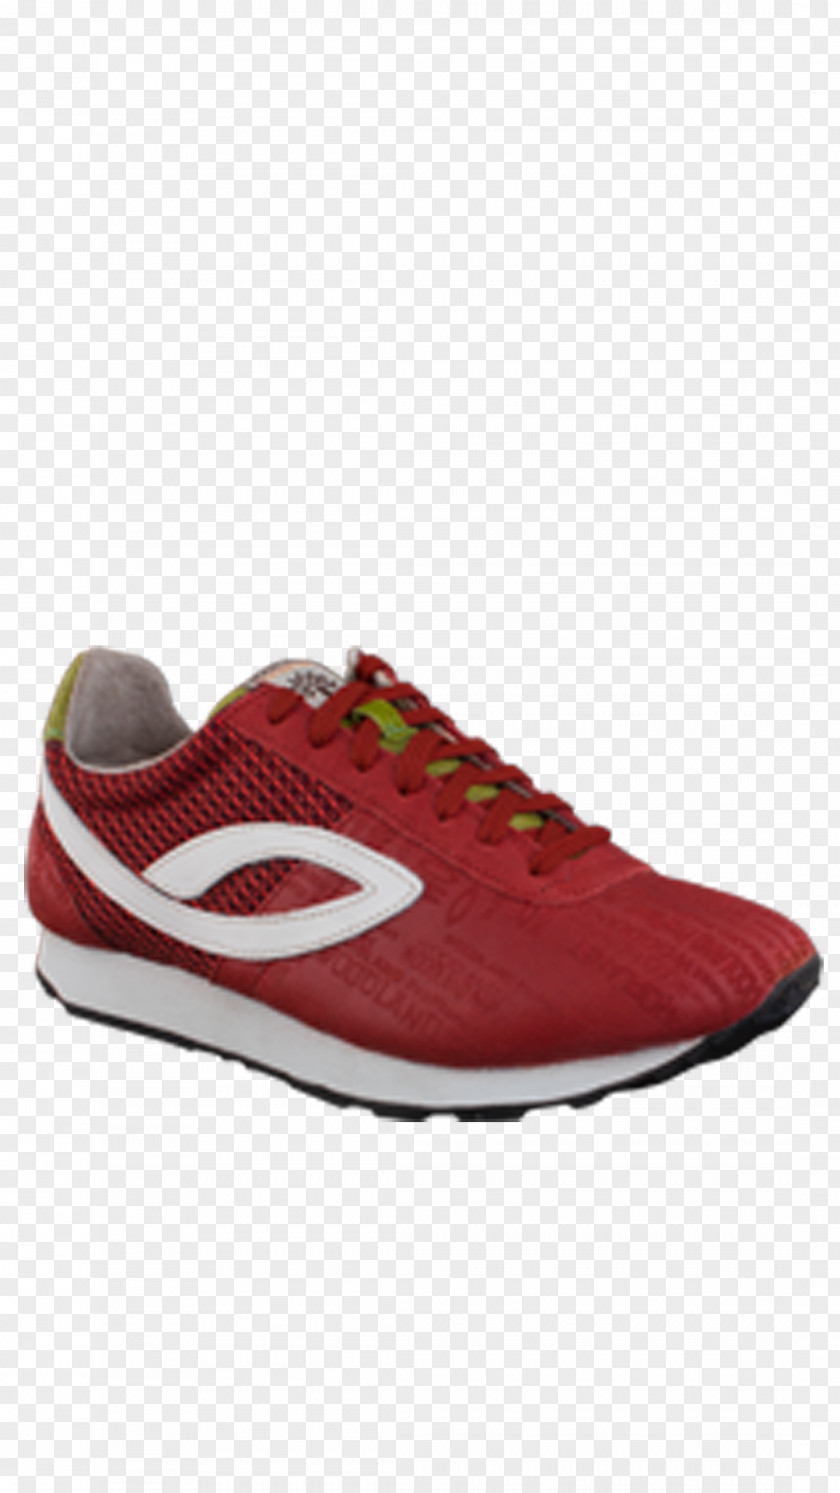 Jogging Sneakers Skate Shoe Sports Shoes PNG